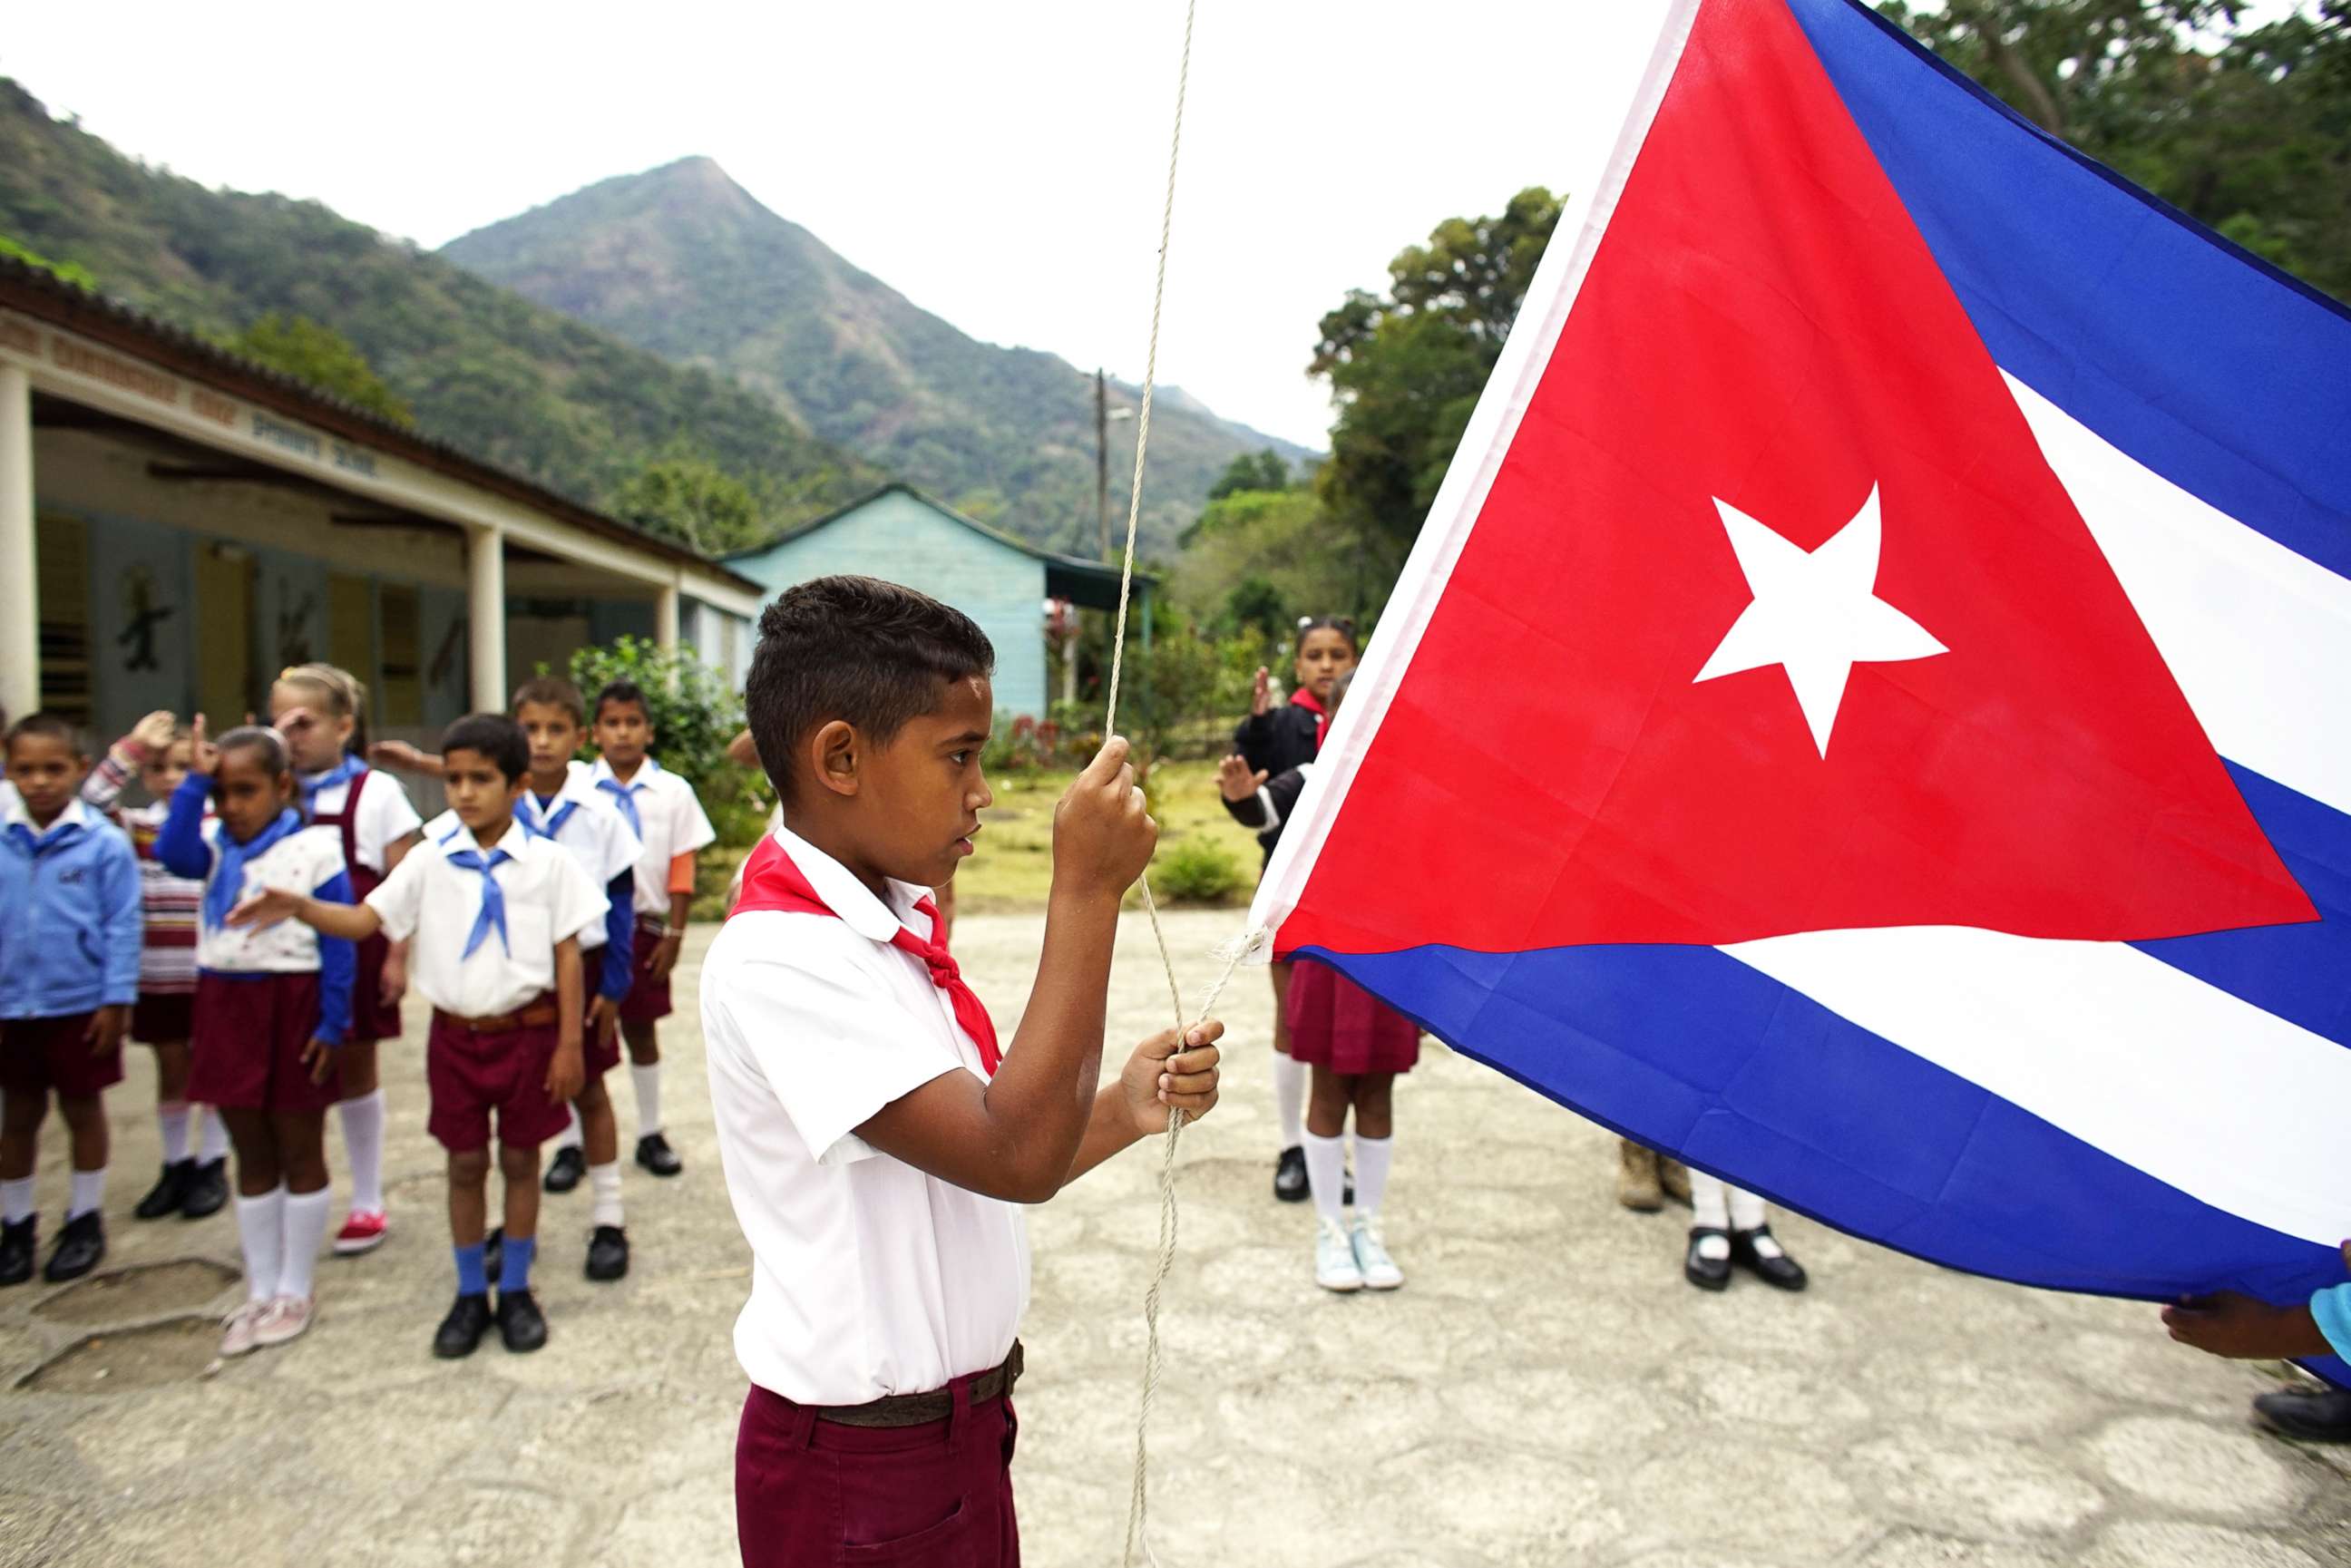 PHOTO: A boy raises the Cuban flag during a daily ceremony held at a school in the village of Santo Domingo, in the Sierra Maestra, Cuba, April 2, 2018.